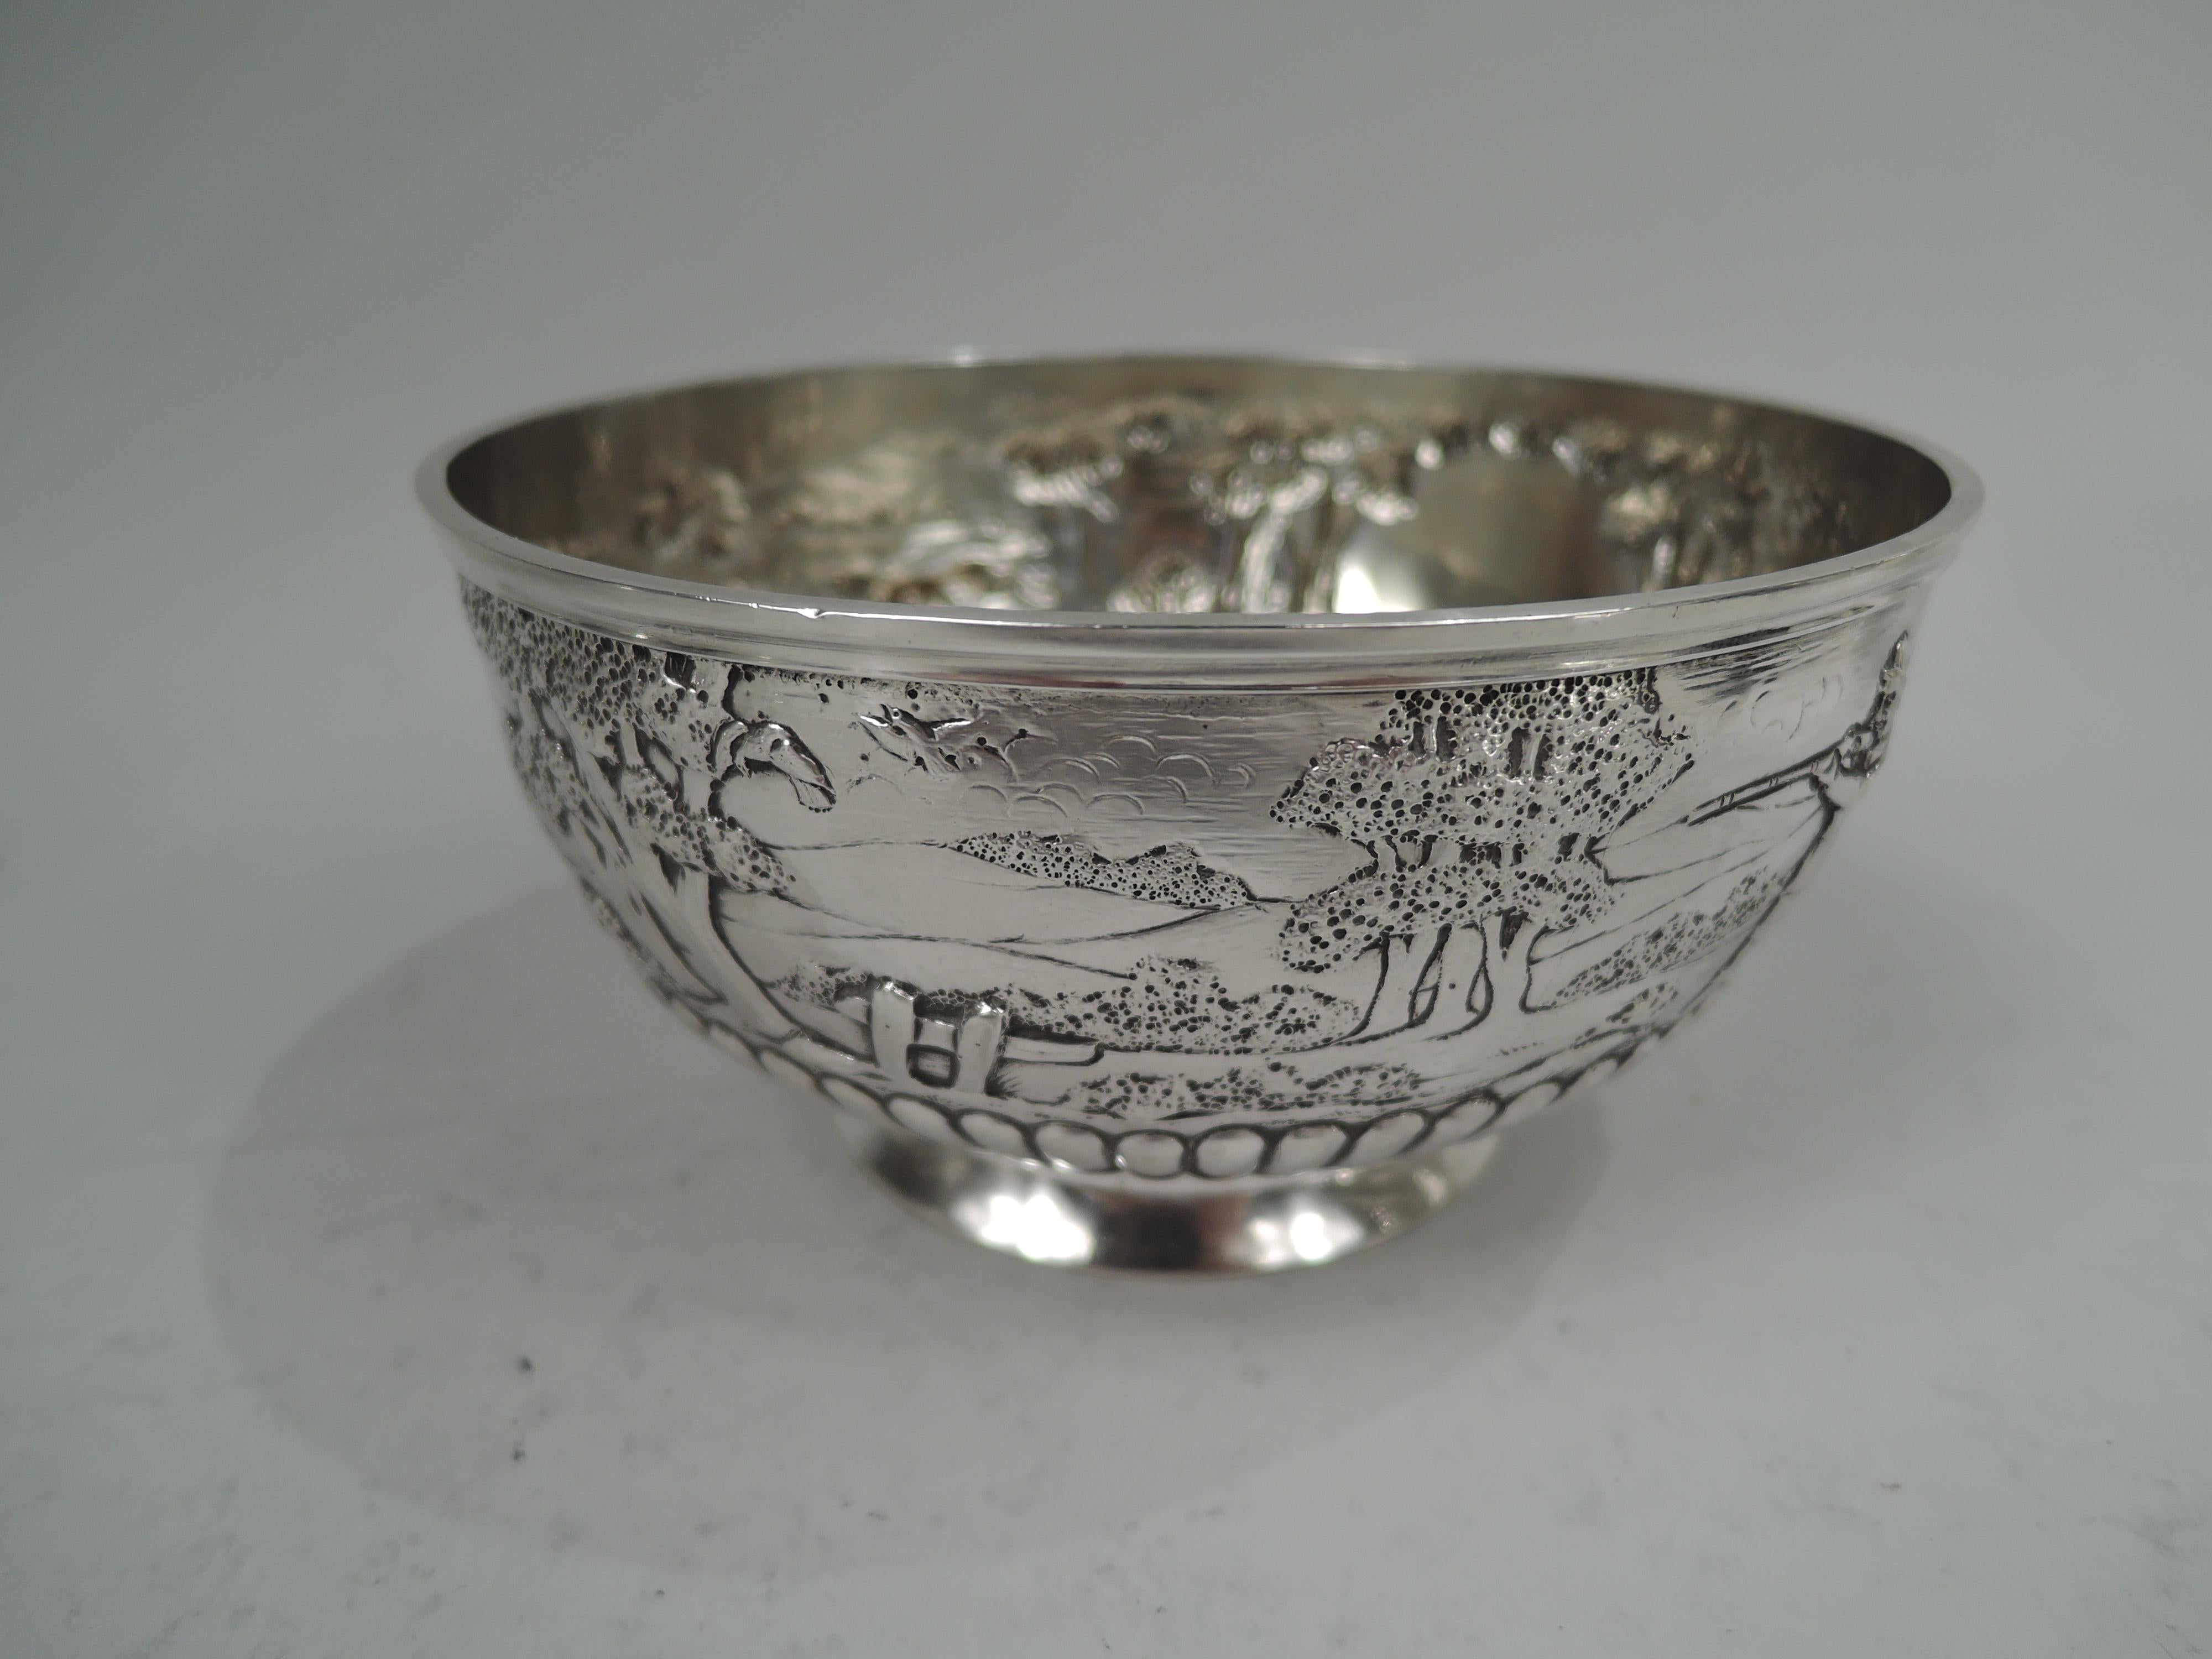 Victorian sterling silver bowl. Made by Frederick Brasted in London in 1884. Round and curved with raised and spread foot. At top chased and engraved scene depicting idyllic countryside with rolling hills and big sturdy trees. In foreground a fox is